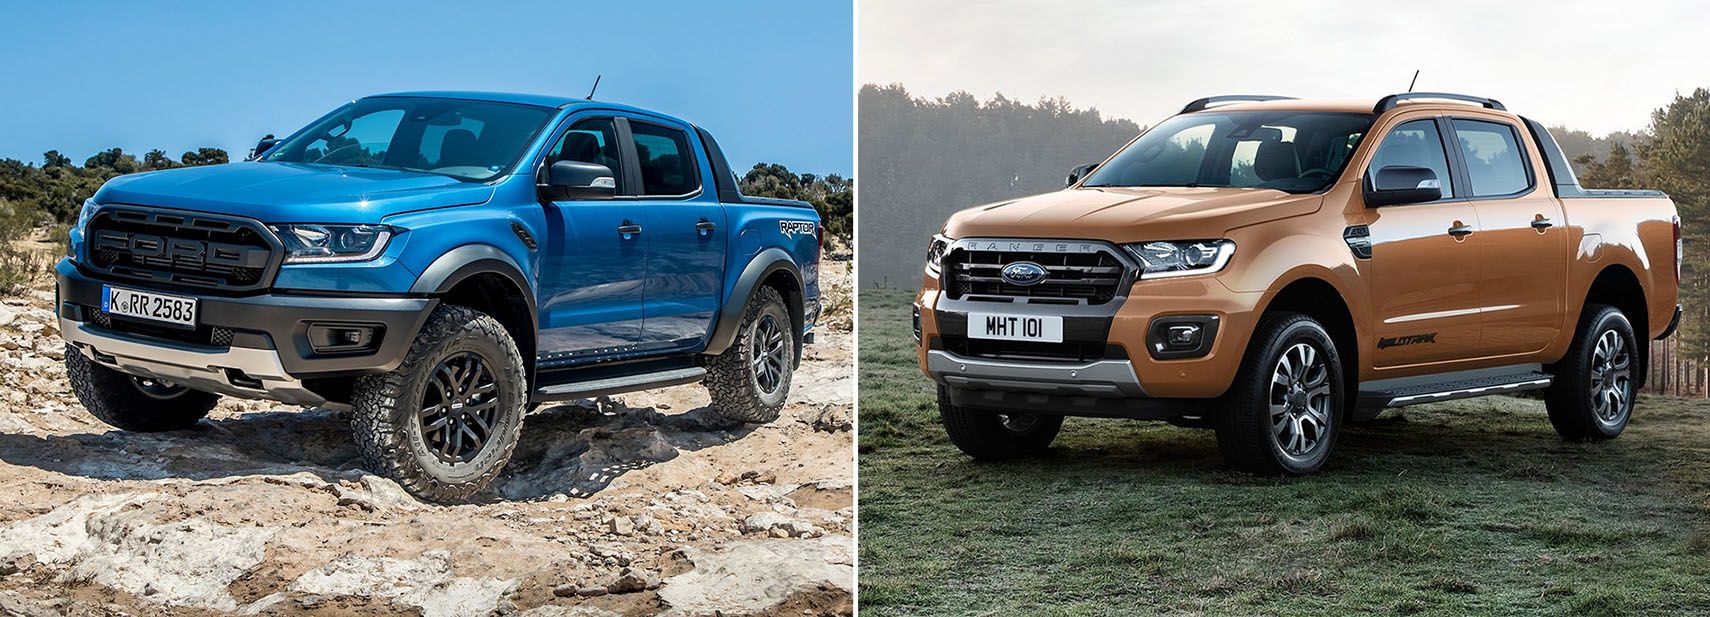 2020 Ford Ranger Raptor on the left, and 2020 Ford Ranger Wildtrak on the right